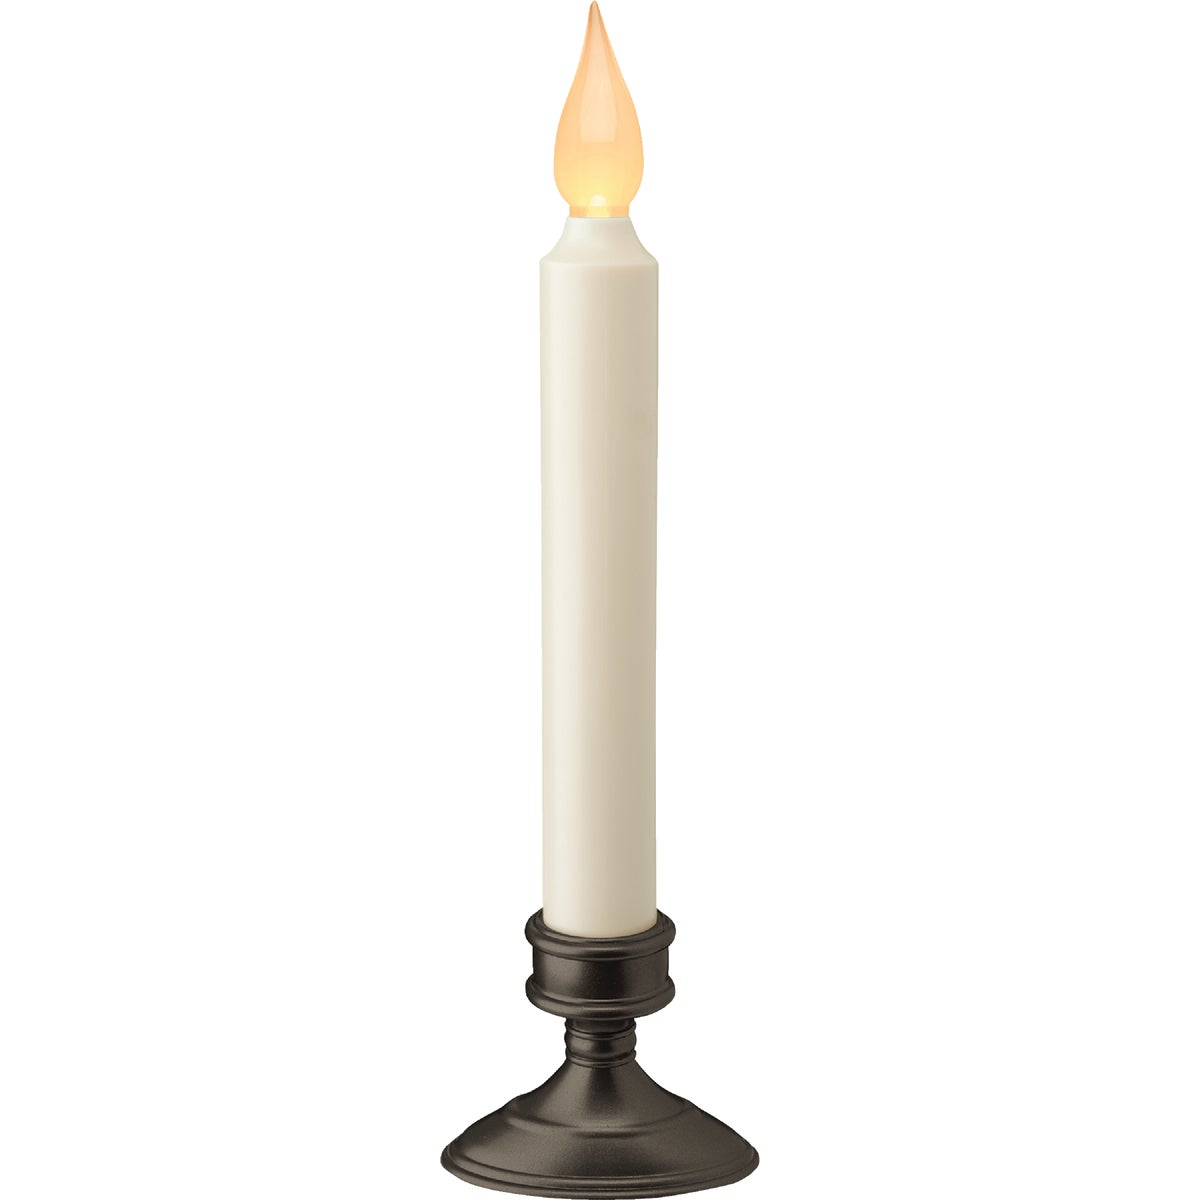 Item 900216, LED (light emitting diode) battery operated window candle with an amber 